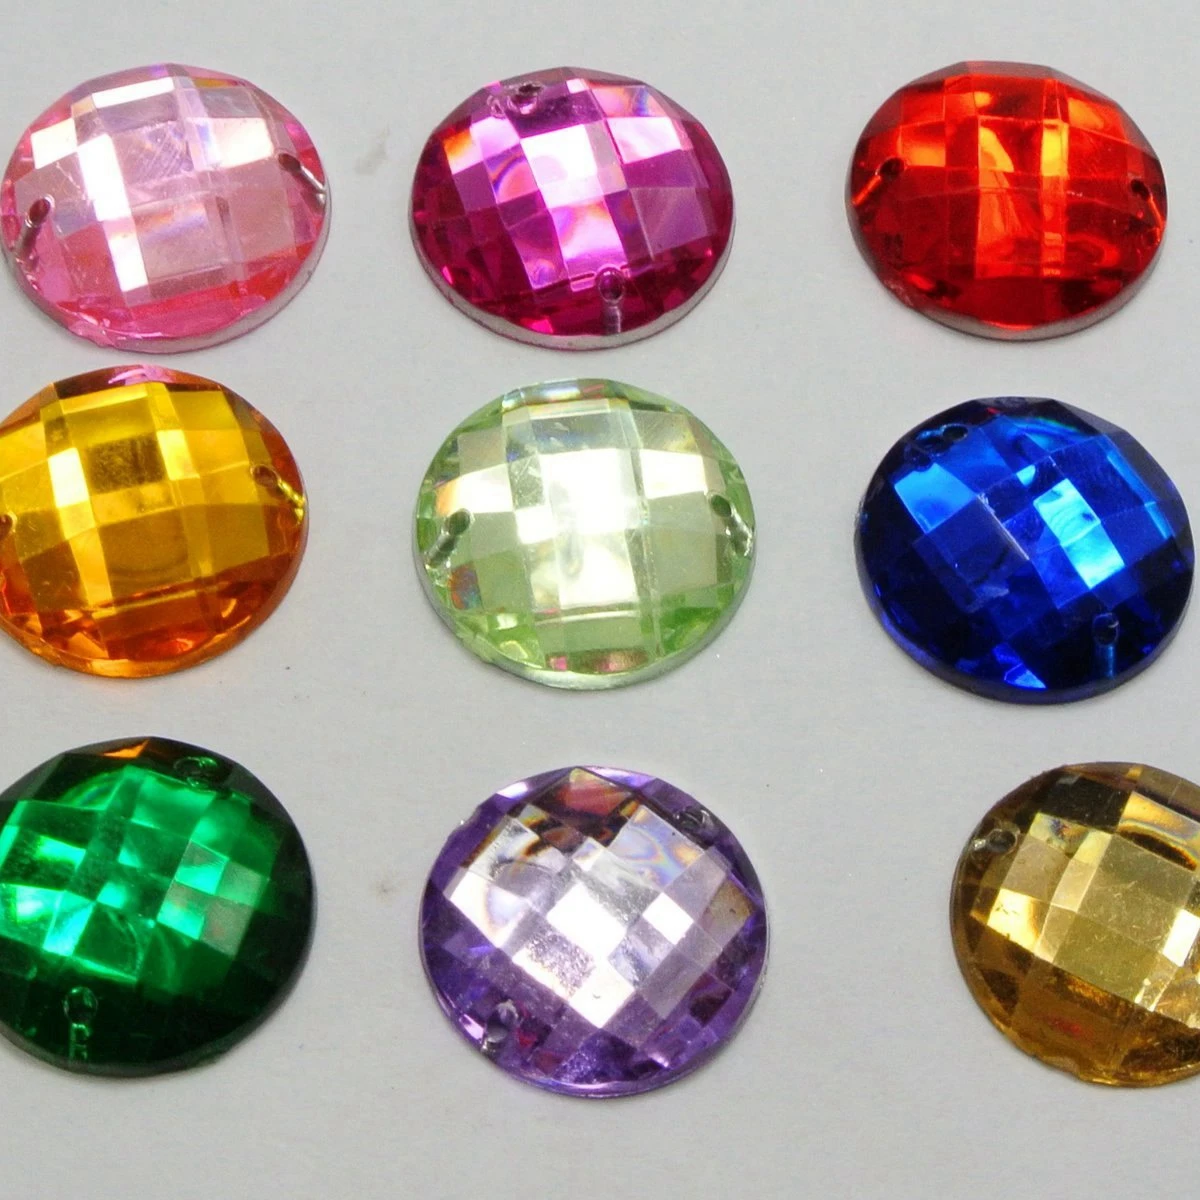 200 Mixed Color Flatback Acrylic Sewing Rhinestone Round Button 12mm Sew on bead